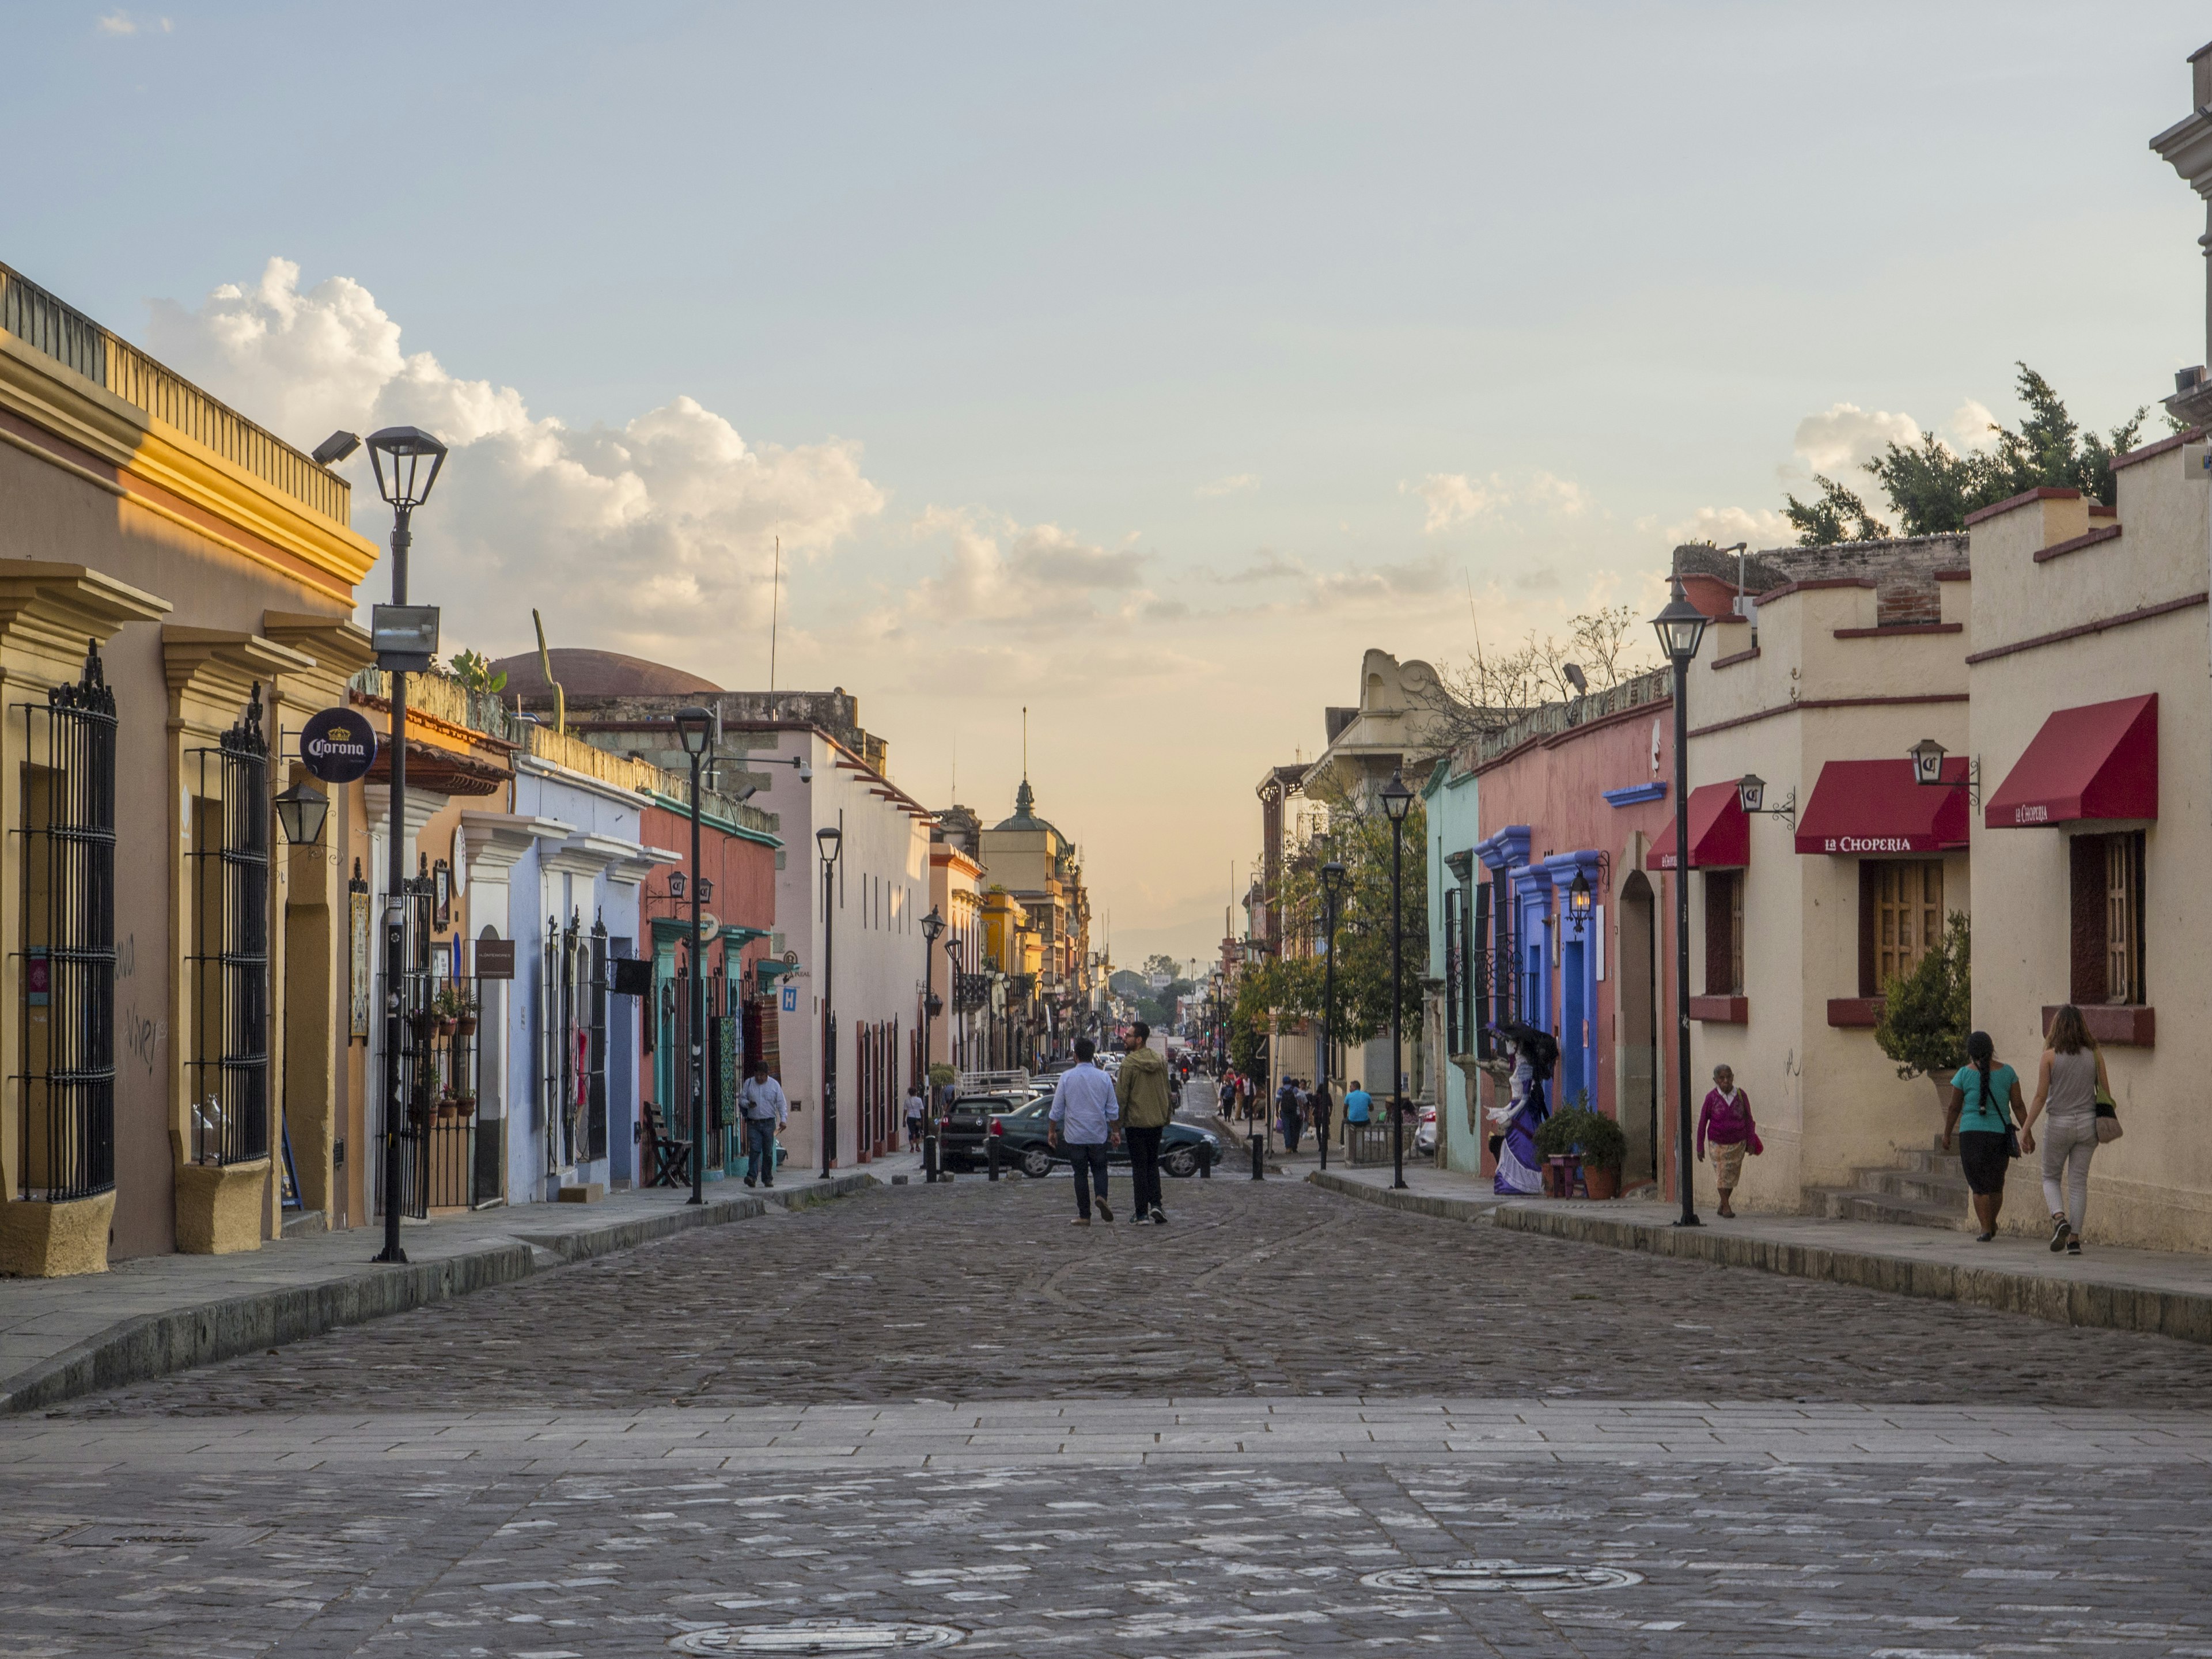 People wander down a cobble stone street lined with colorful colonial buildings in Oaxaca, Mexico © Melissa Kuhnell